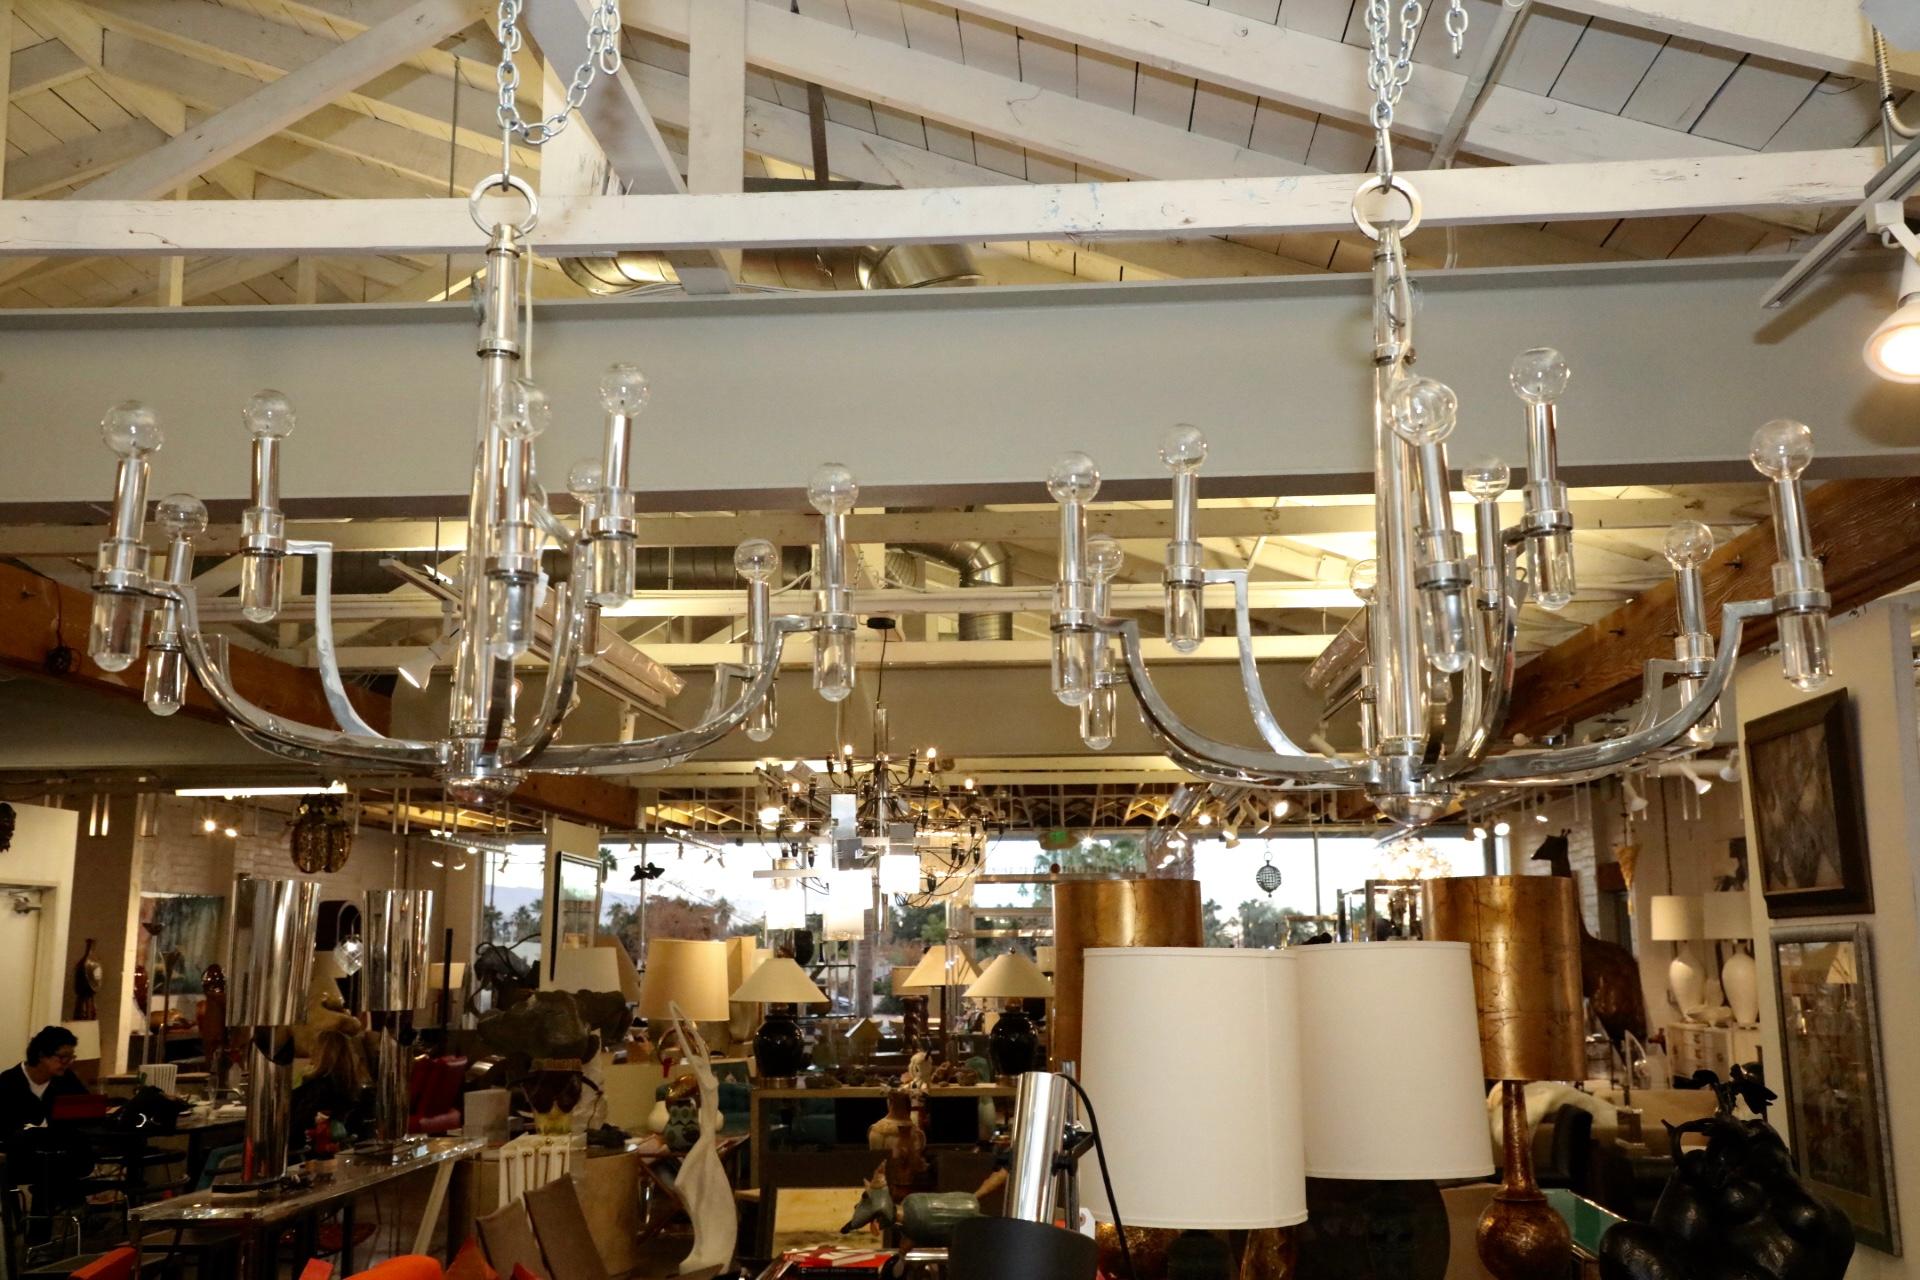 An elegant pair of Lucite glass and nickel-plated Brass chandeliers. The quality of these is extremely high. Nicely designed and in good condition, with only minor surface imperfections and marks. Sold each. One is shown lit.